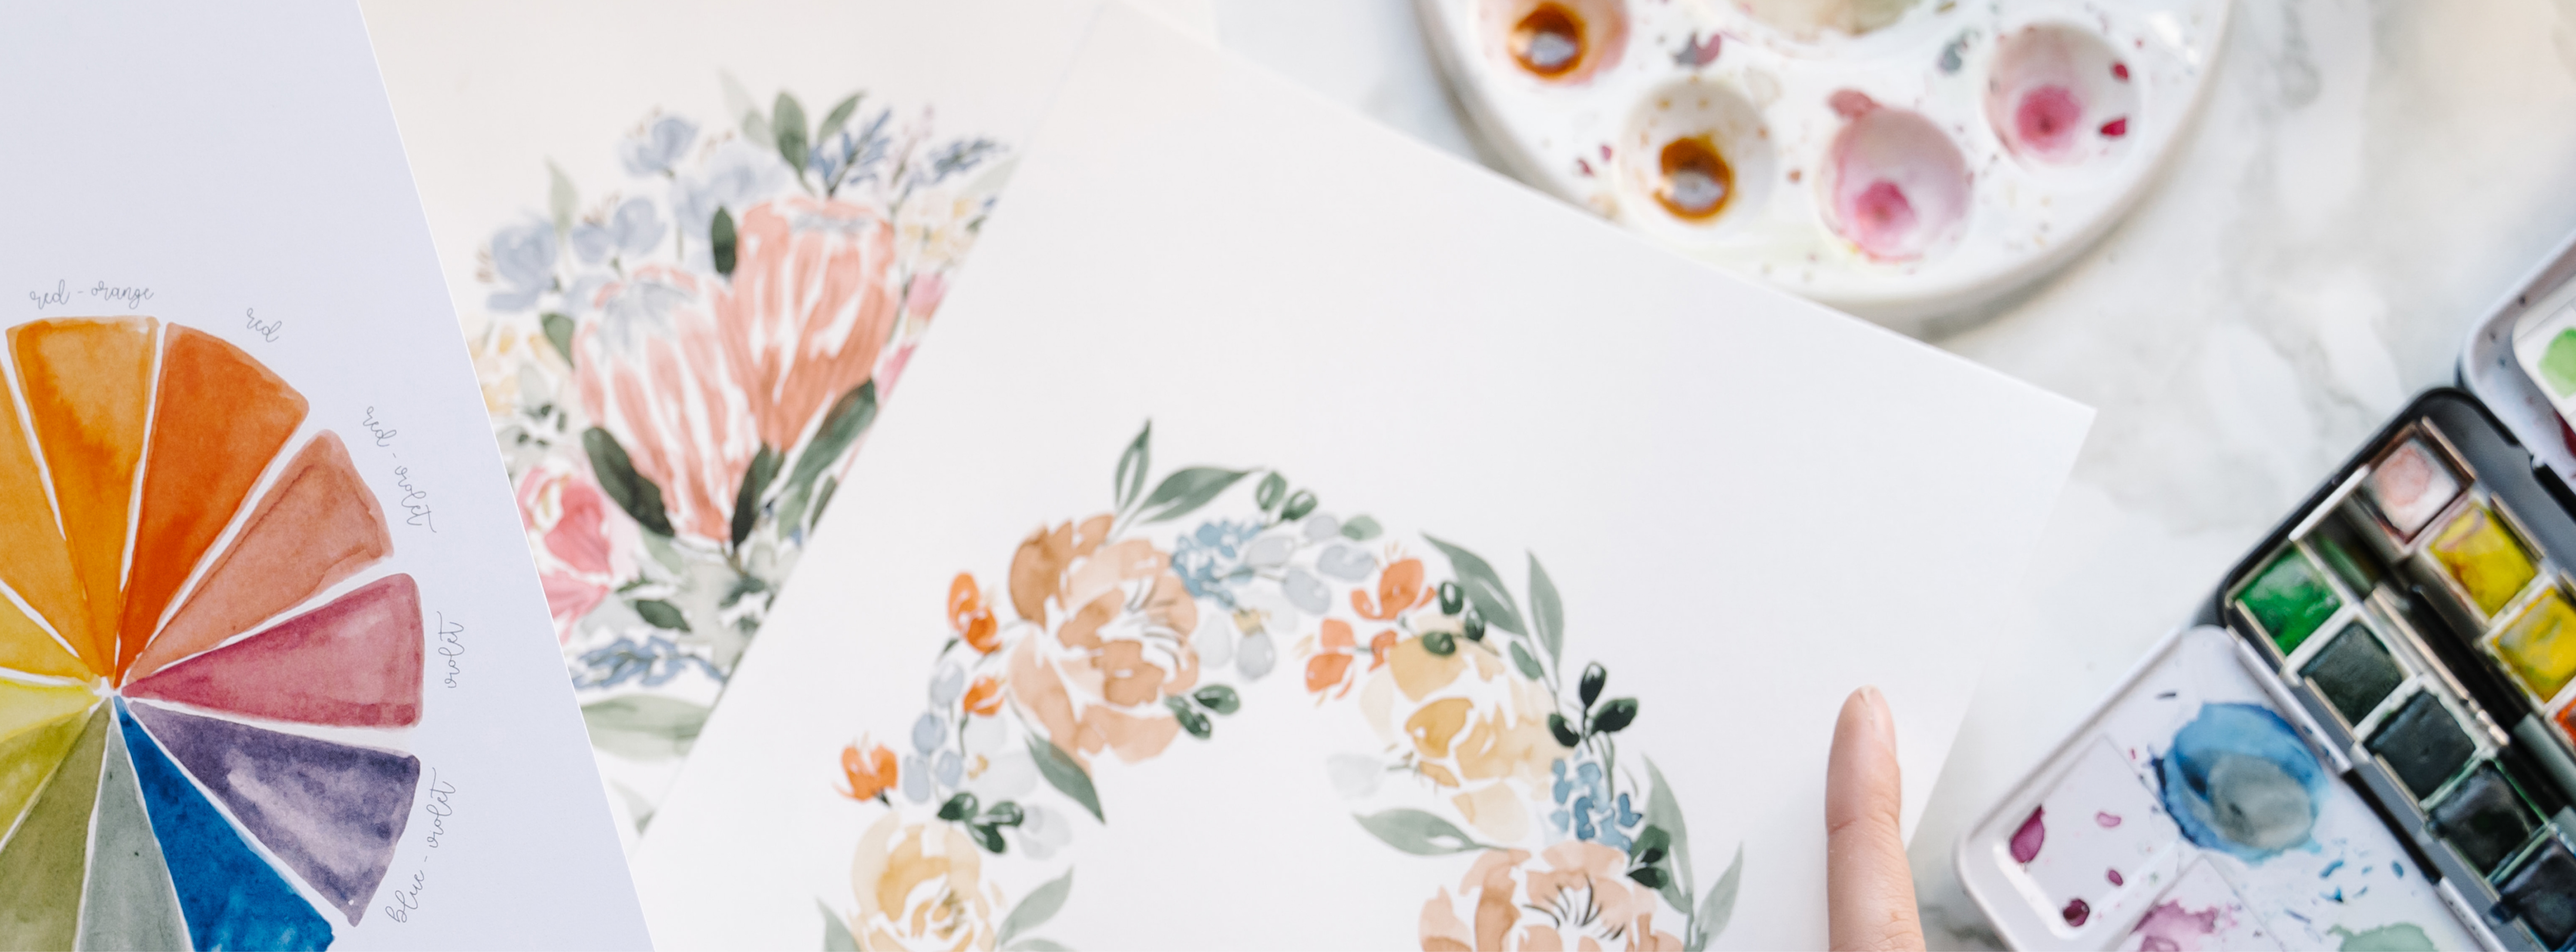 Learn the joy of watercolour painting with an introduction to modern florals and discover the confidence to embrace your everyday creativity.